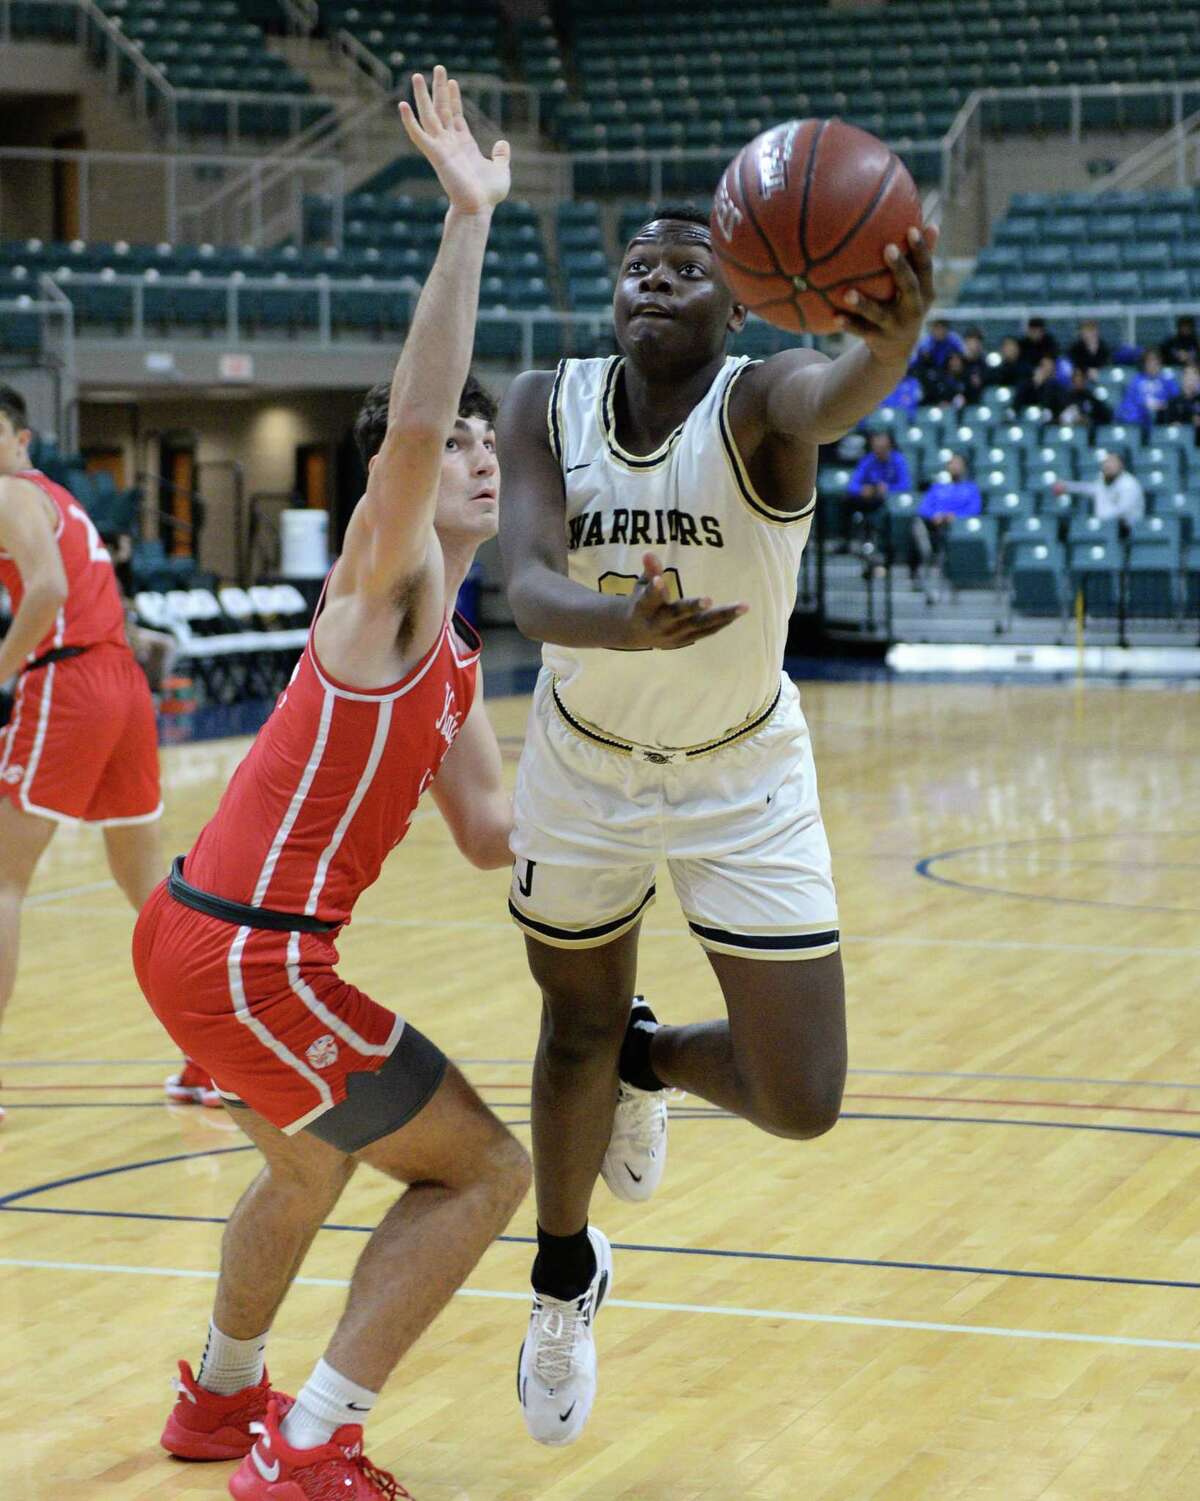 Jude Oluokun (21) of Jordan drives past Aydan Perdue (14) of Katy in the first half of a pool game between the Katy Tigers and the Jordan Warriors during the Katy ISD Basketball Classic on Thursday, December 2, 2021 at the Leonard Merrill Center, Katy, TX.